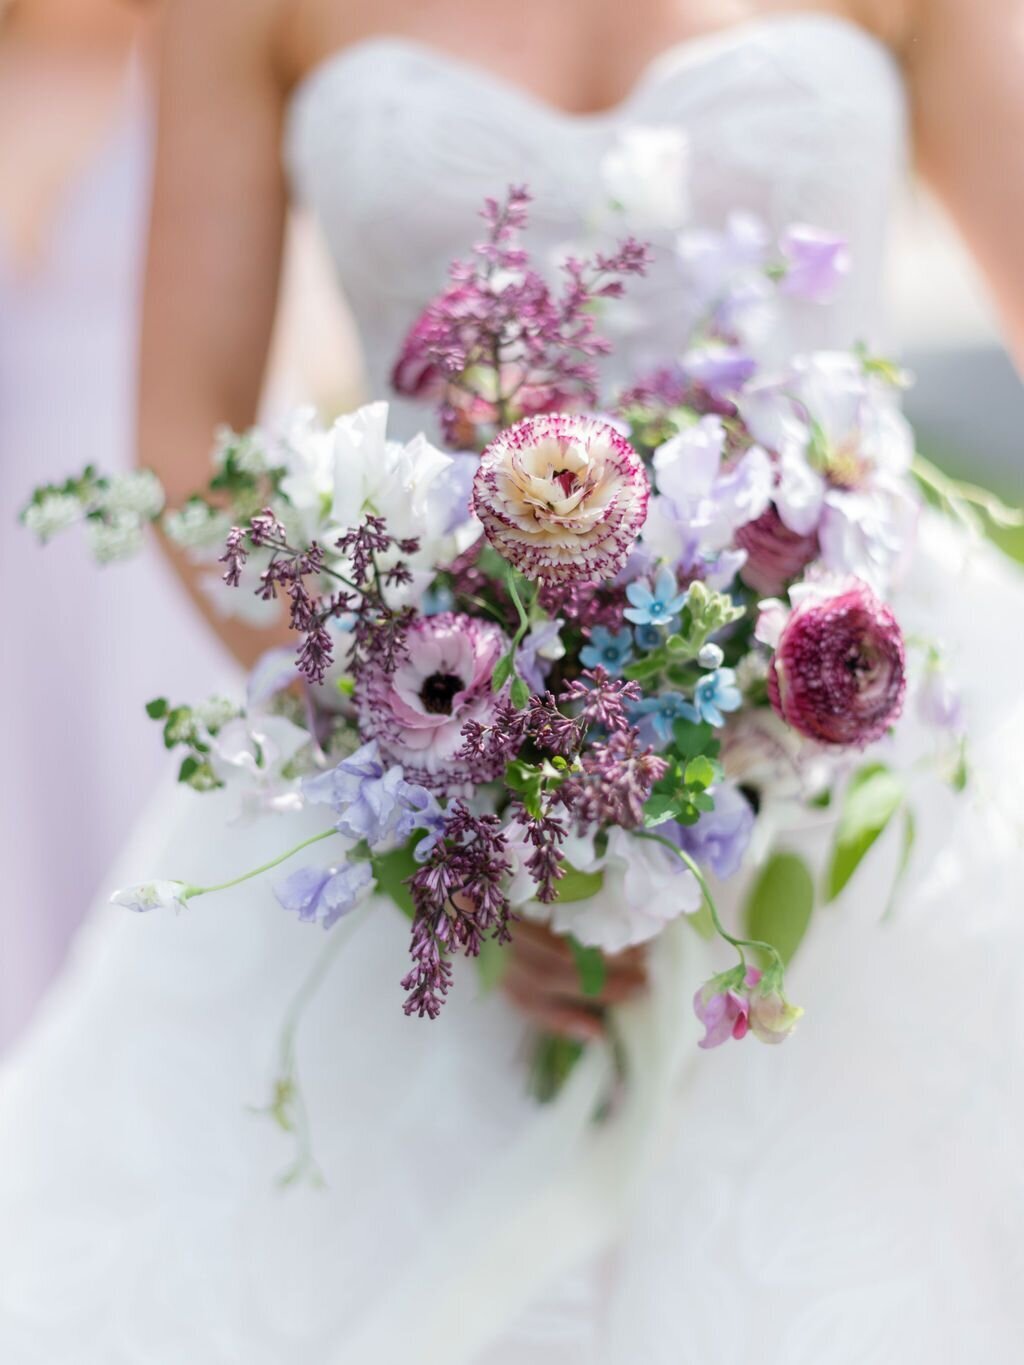 TTWD Romantic Bridal Bouquet at Glenmere Mansion